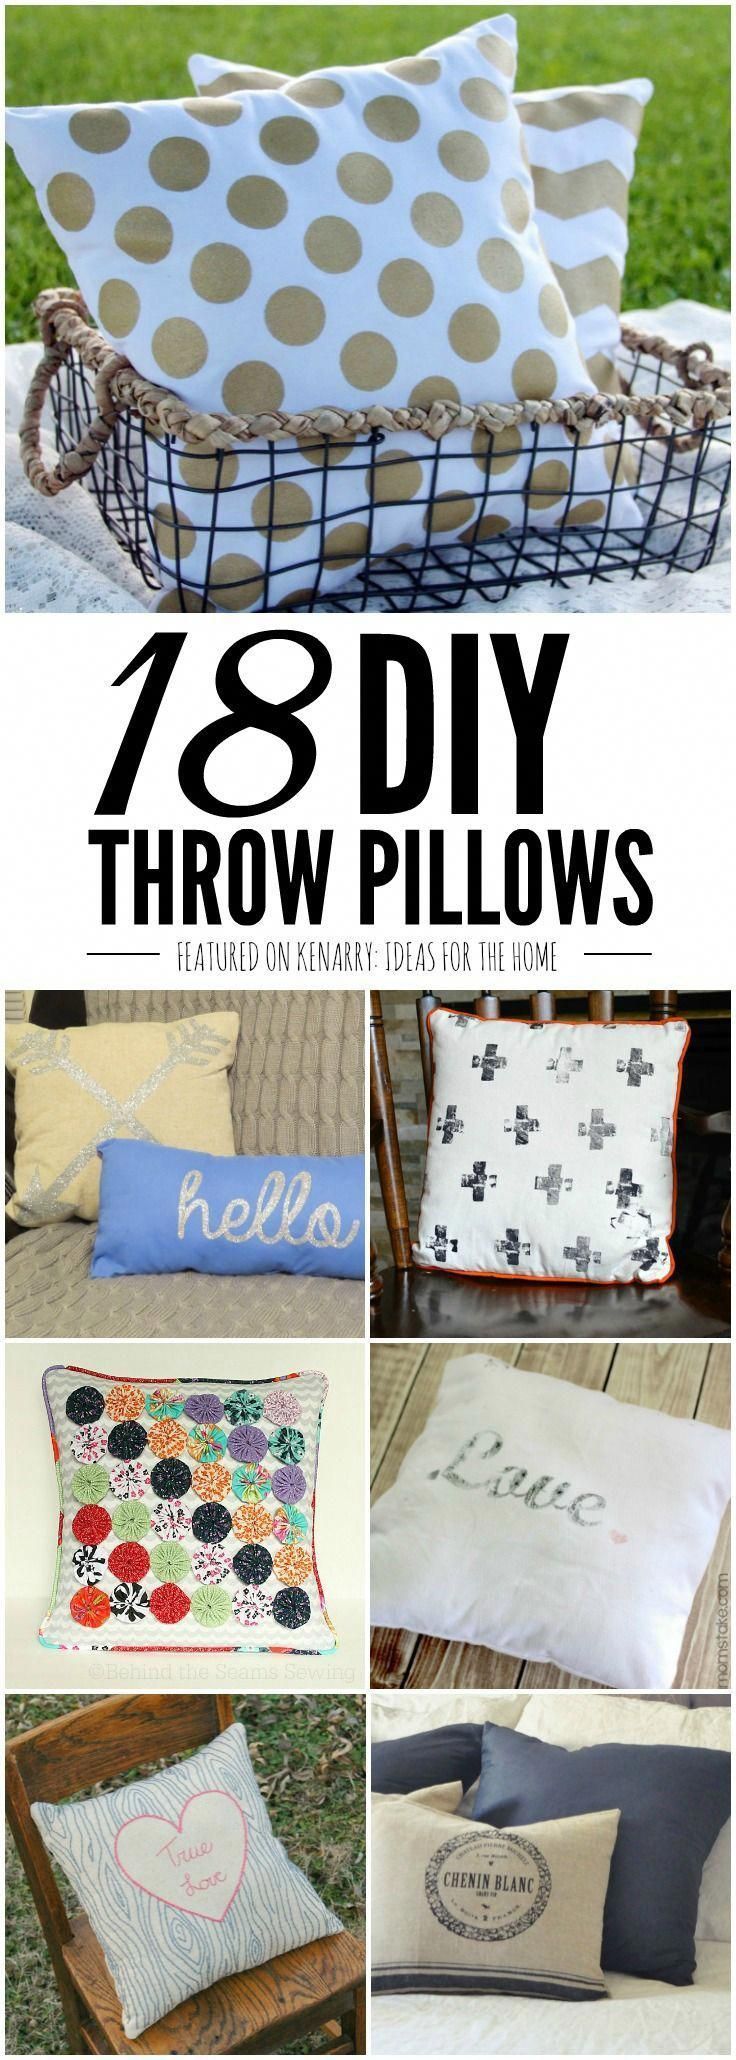 18 Great Tutorials to Make Your Own Throw Pillows -   18 diy projects Sewing throw pillows ideas